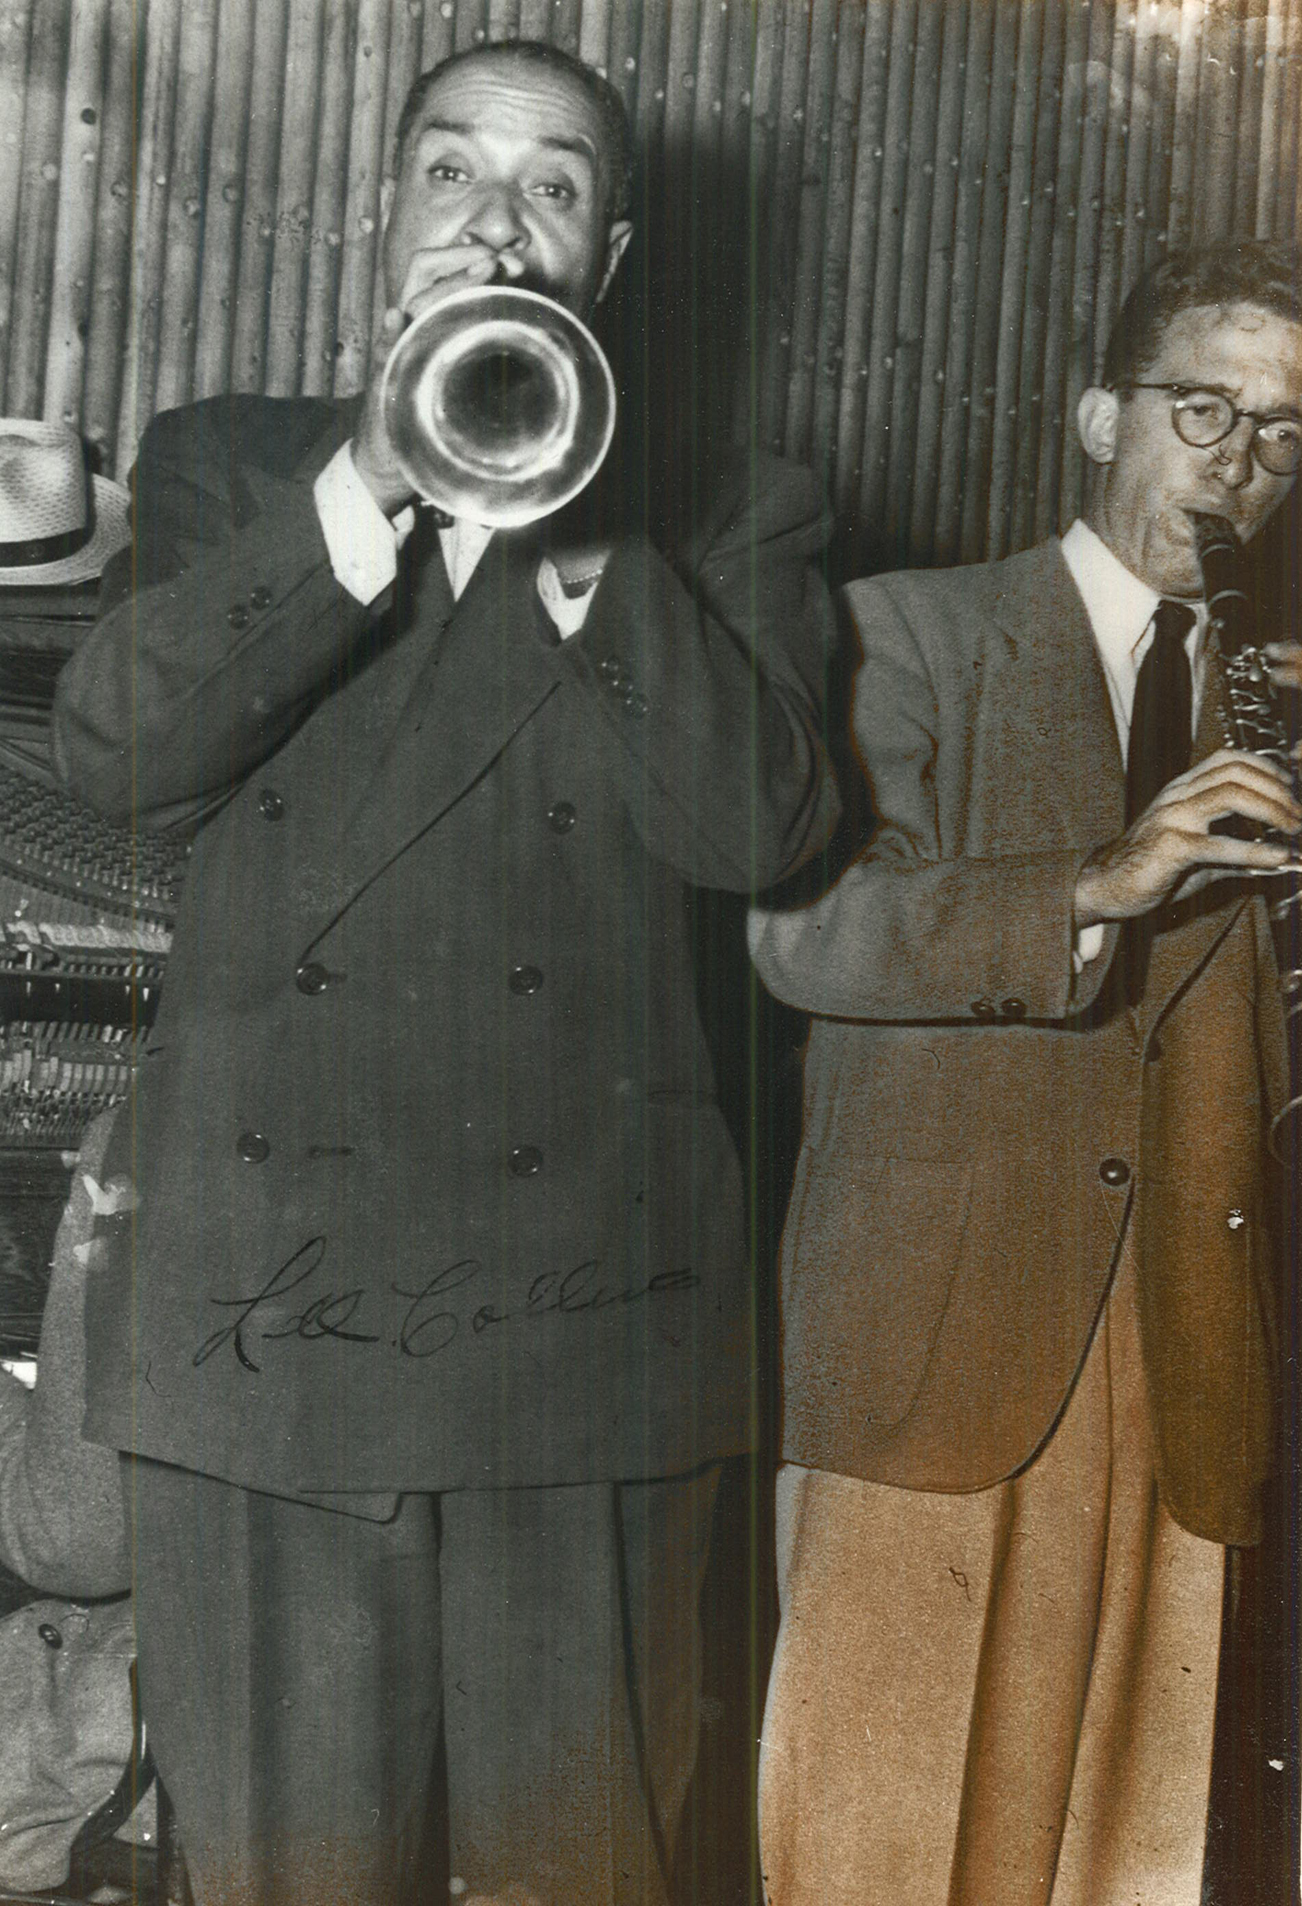 Lee Collins and Henry Blackburn at the Victory Club, Chicago, 1948. (photo courtesy of Henry Blackburn)